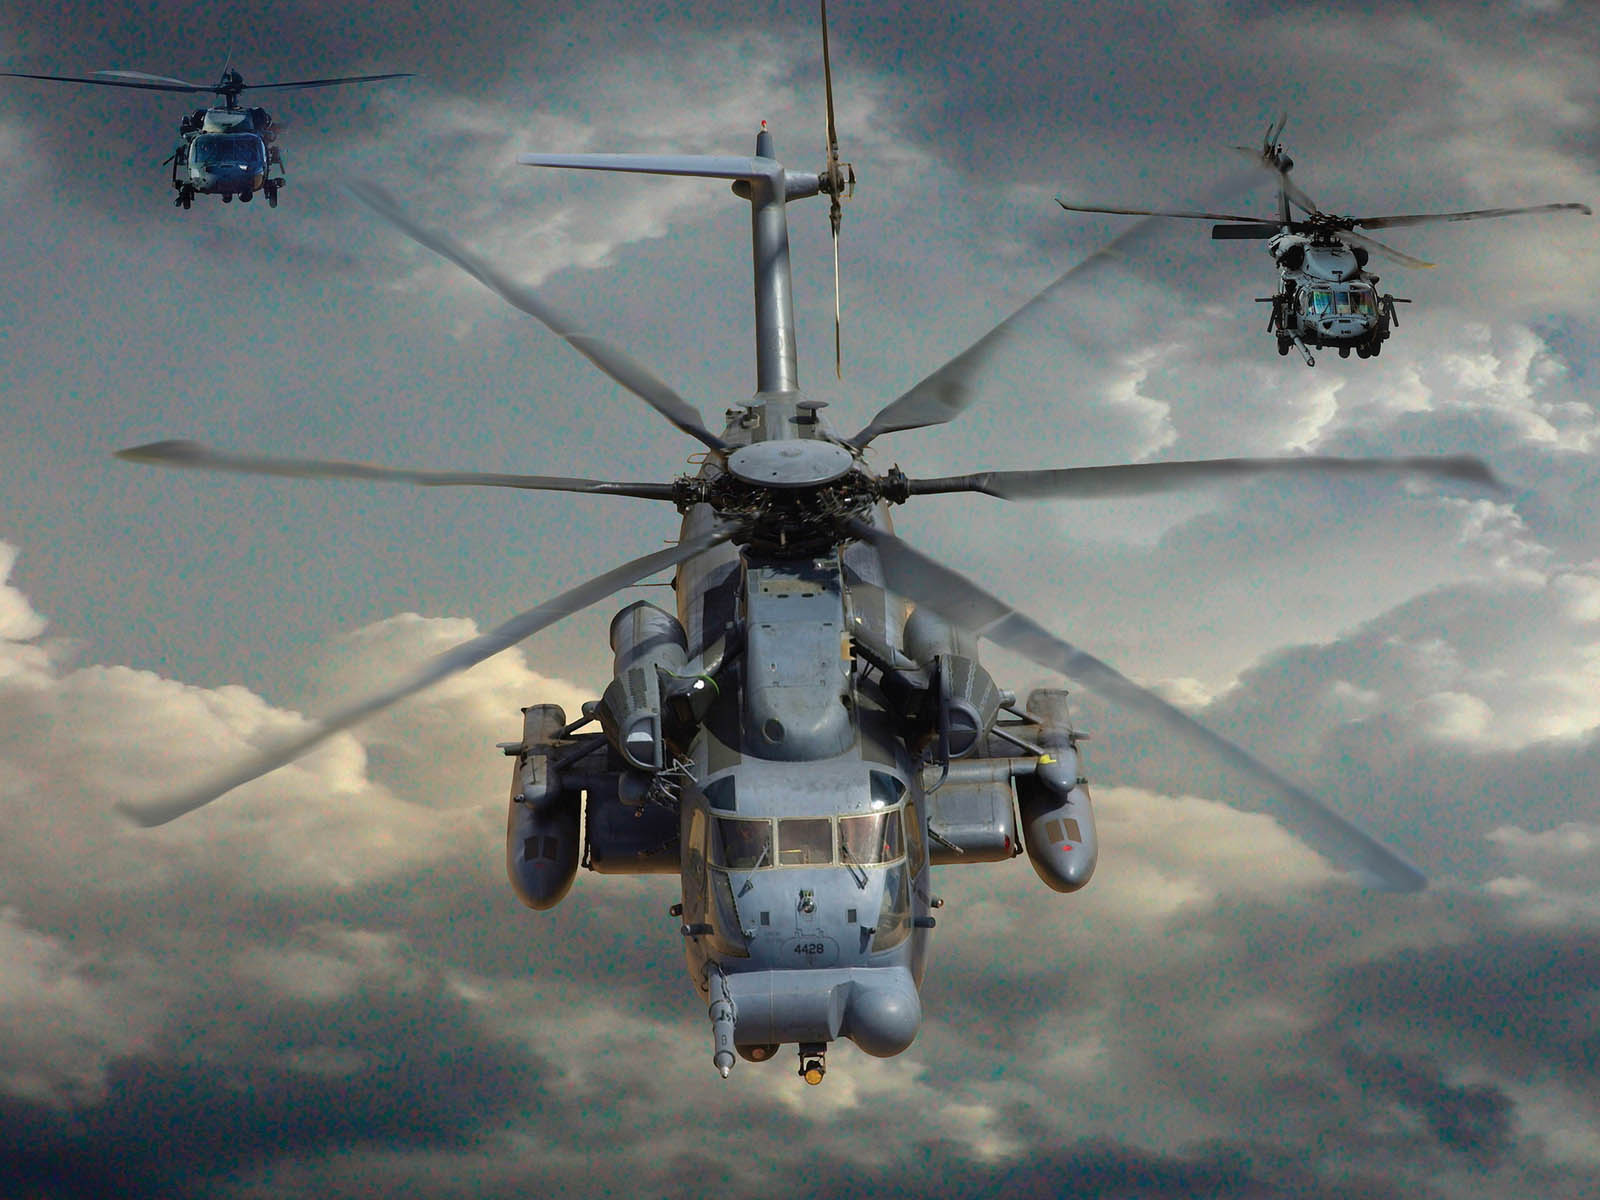 wallpapers mh 53 Pave Low Helicopter Wallpapers